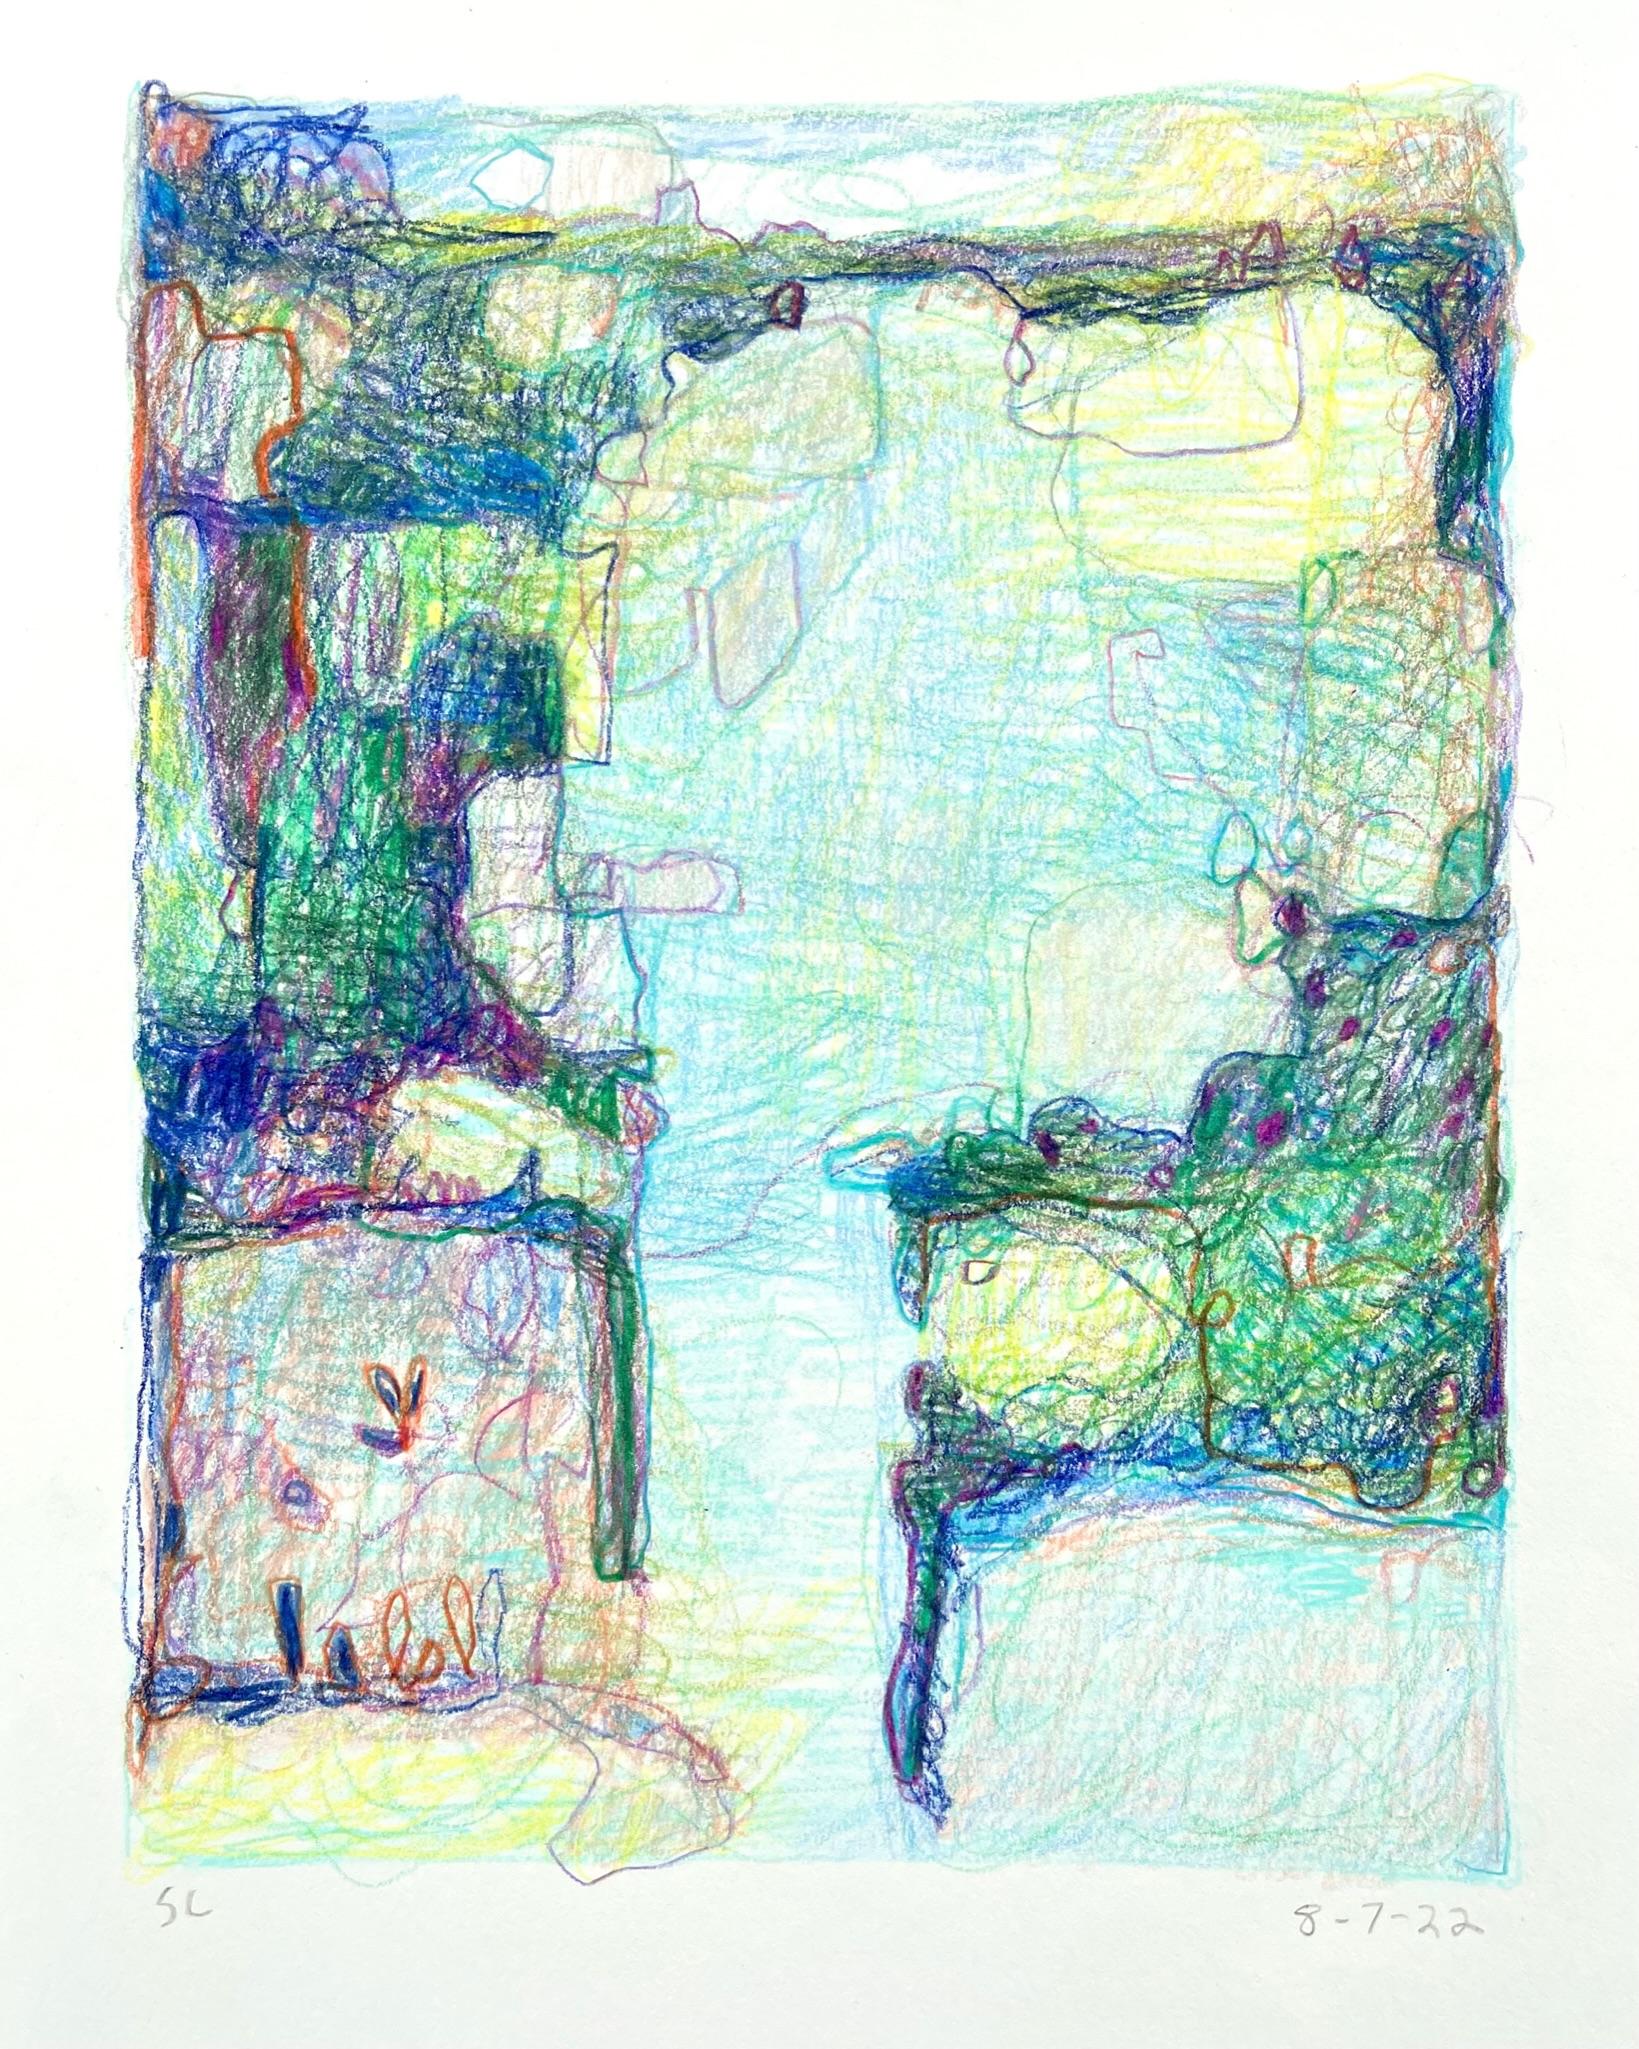 8-7-22, Impressionist, abstracted landscape drawing with colored pencil